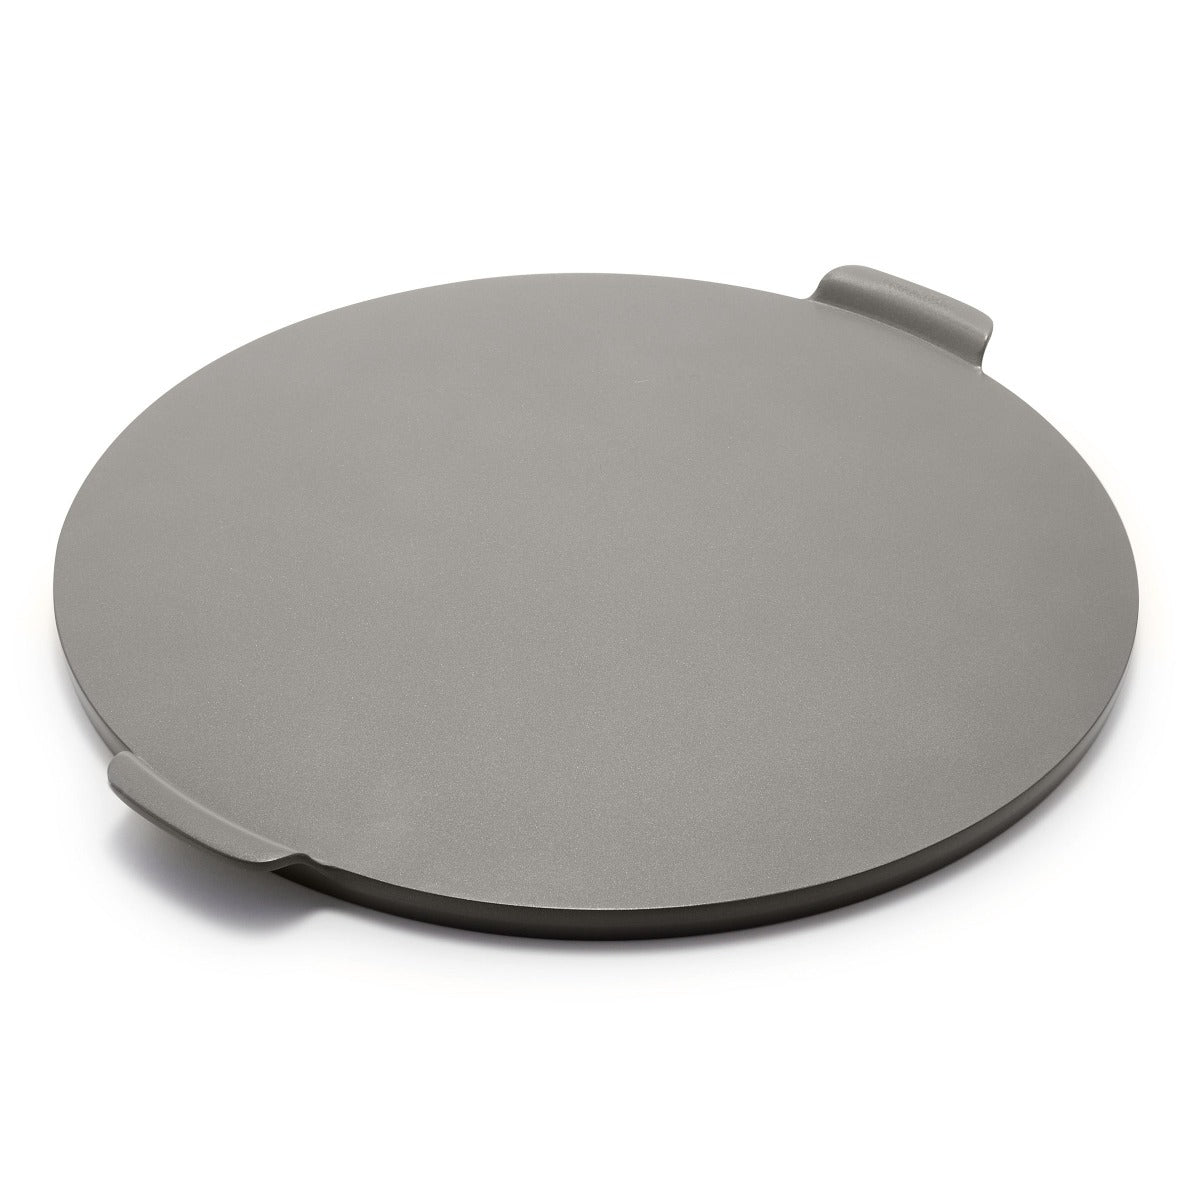 Shop by Category - Gourmet Kitchen - Bakeware - USA Pans Bakeware - Page 1  - Distinctive Decor